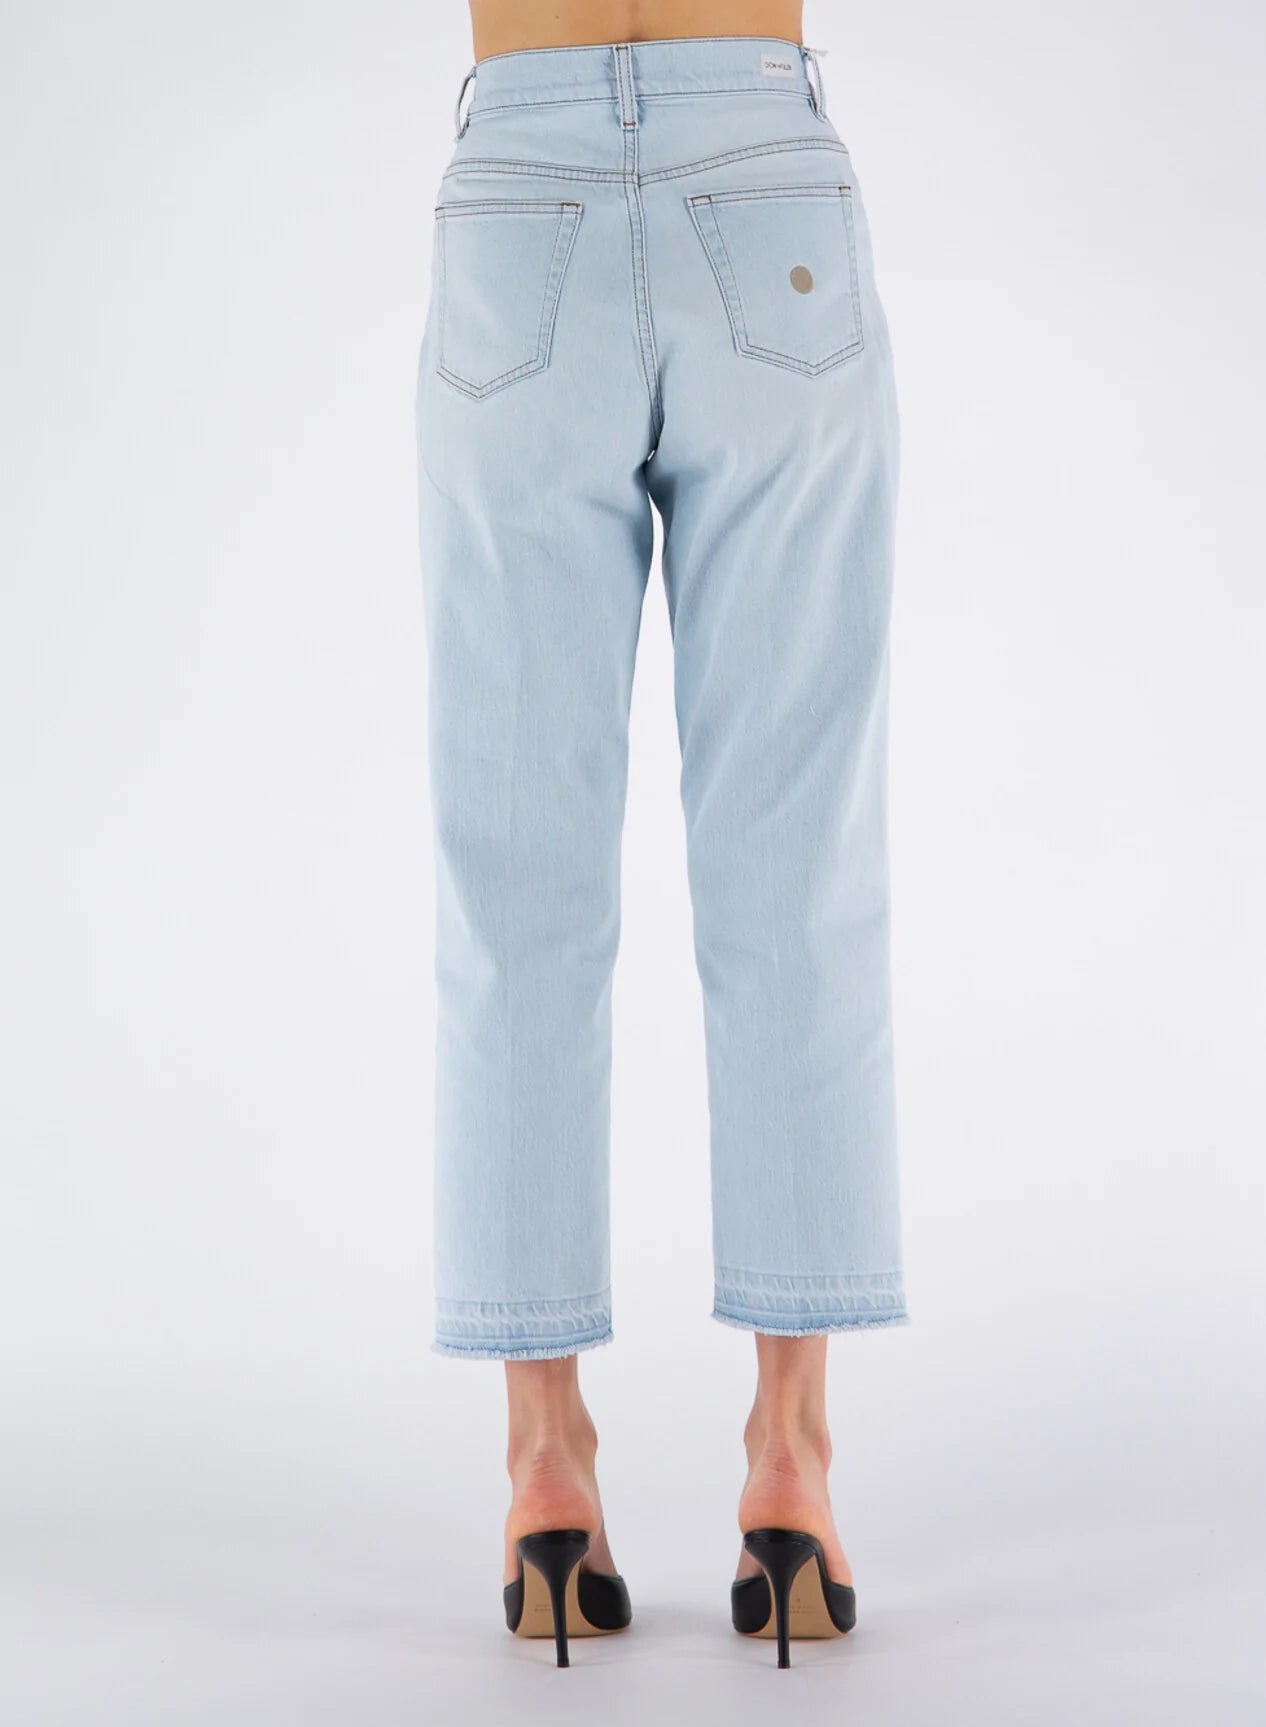 Don The Fuller Light Blue Cotton Jeans & Pant Don The Fuller, feed-1, Jeans & Pants - Women - Clothing, Light Blue, W25 | IT39 at SEYMAYKA